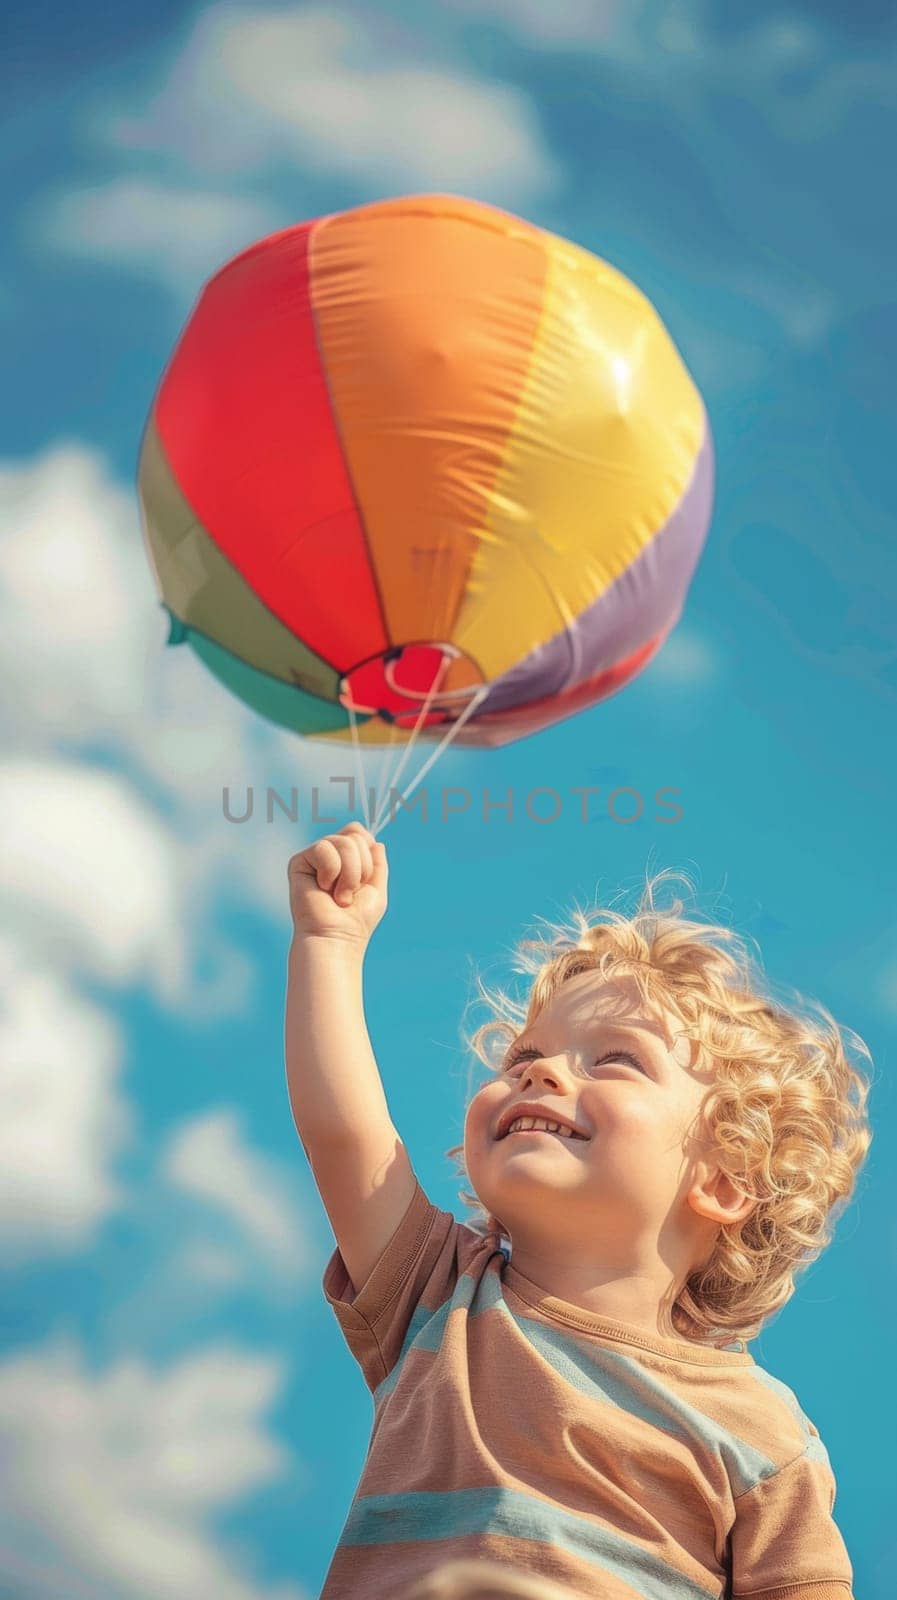 A young boy holding a colorful kite in the air